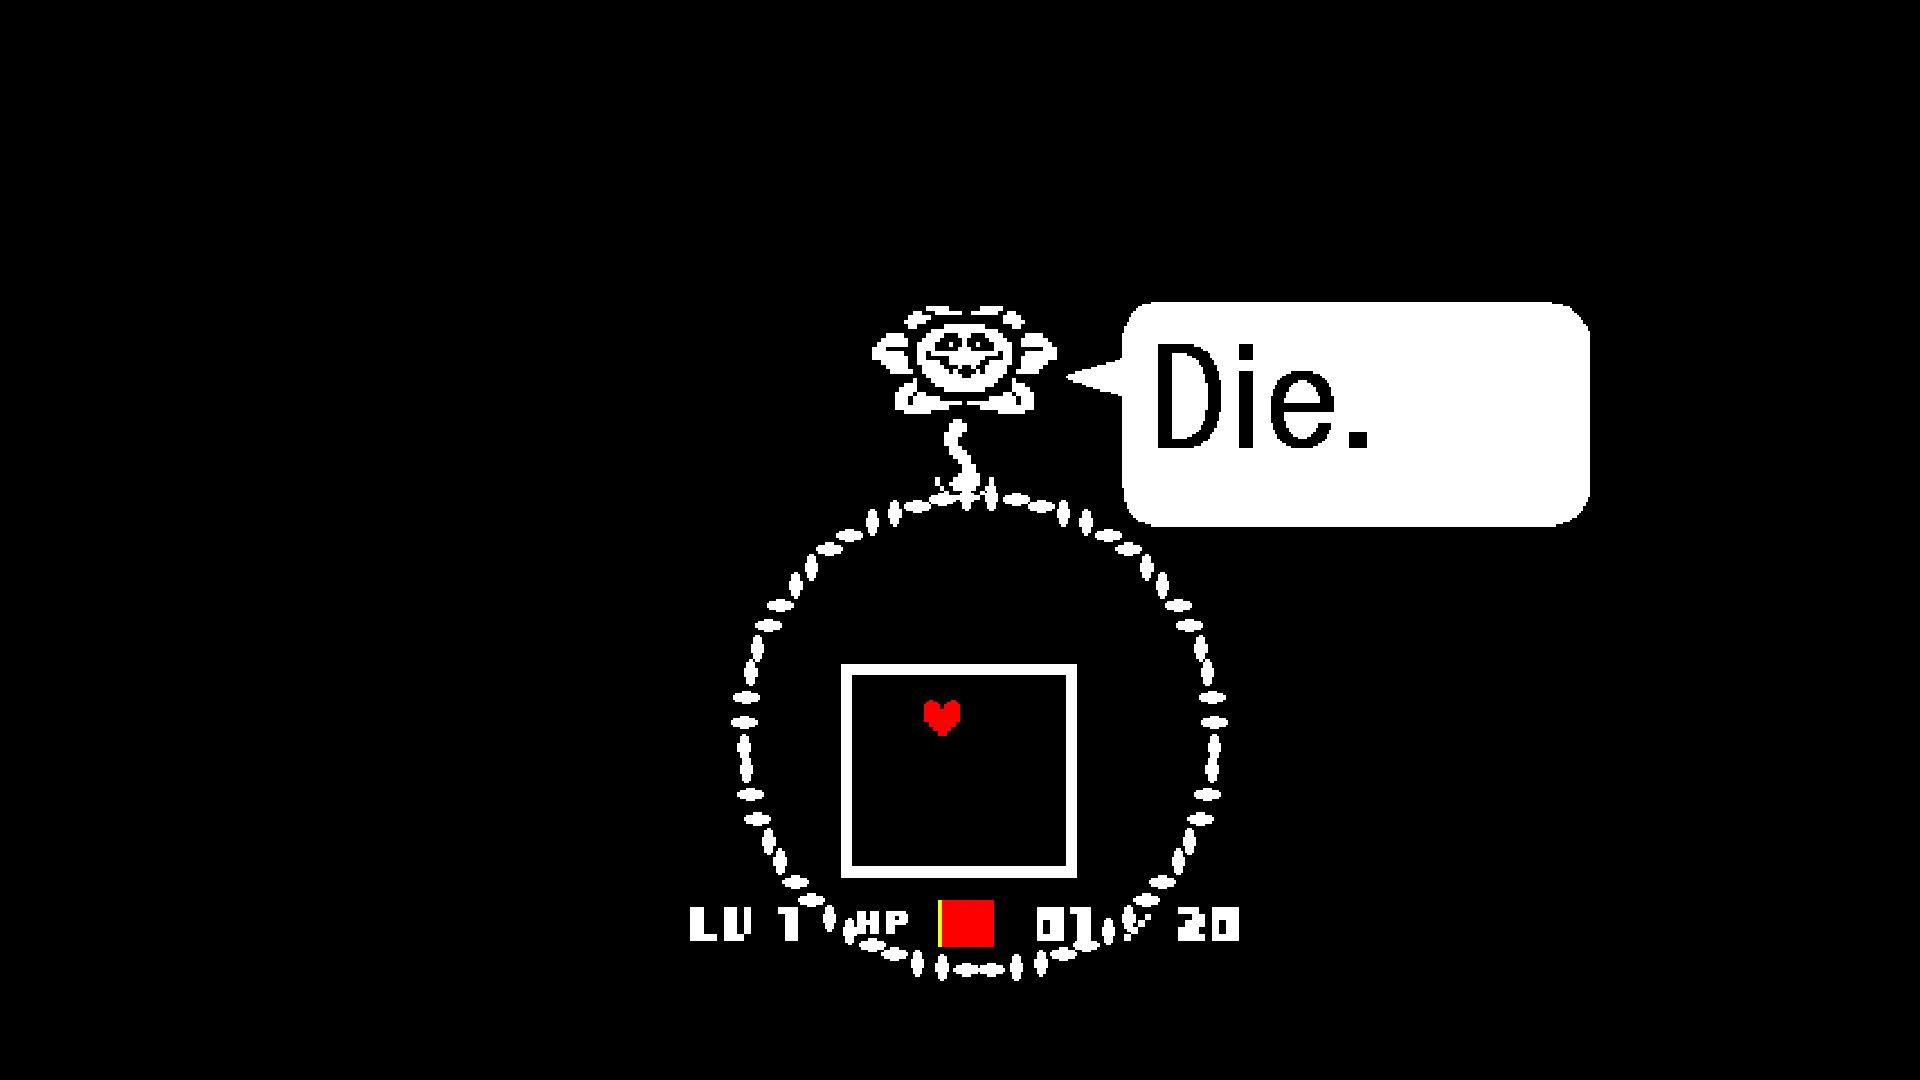 Although, Toriel knocks Flowey away, saving you, and offers you a guide  through the Ruins. The encounter with Flowey will end and Toriel will walk  away.